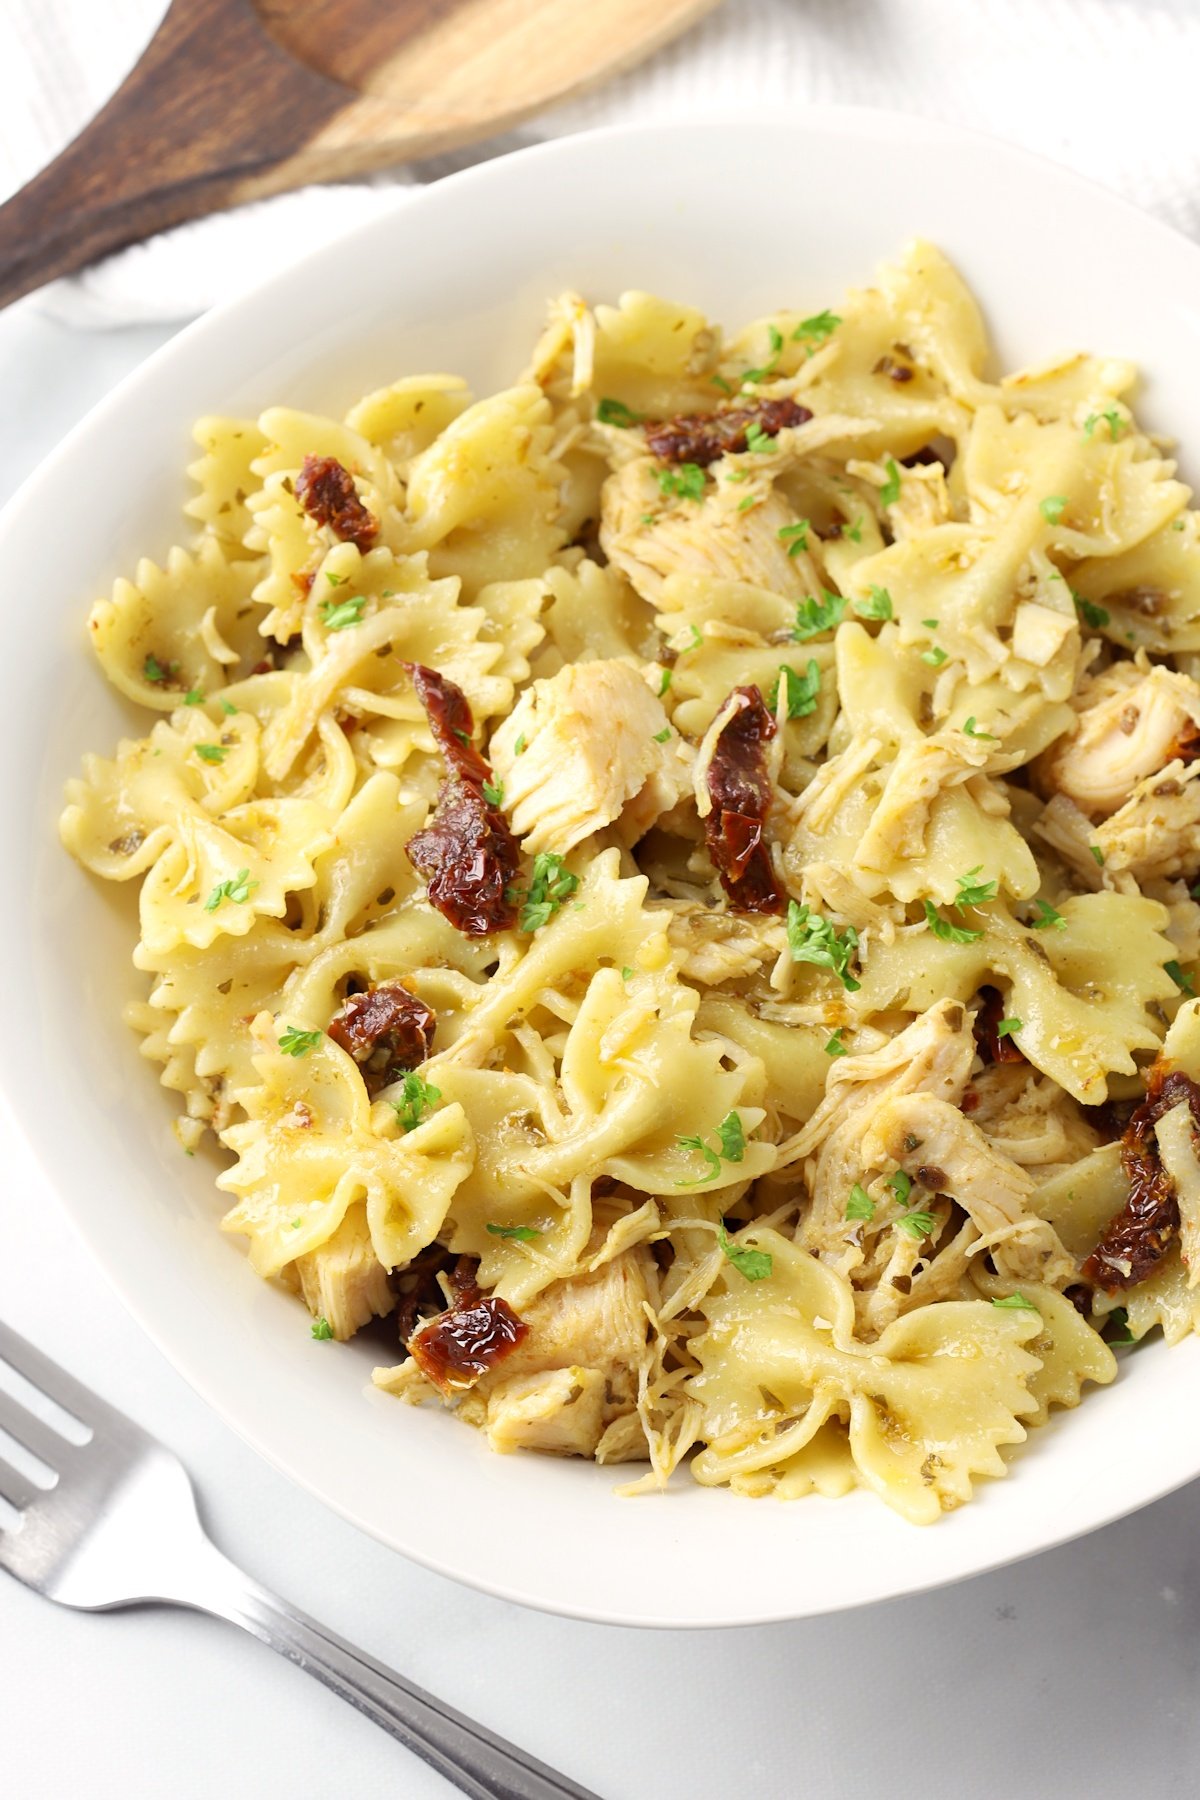 These family-friendly meals use pantry ingredients like beans, lentils, canned goods, pasta, rice, and broth, plus or minus staples that keep well in the freezer or refrigerator. These flexible recipes are all about using what you have on hand to make easy, delicious lunches and dinners! | glitterinc.com | @glitterinc // 5-Ingredient Pesto Chicken Pasta